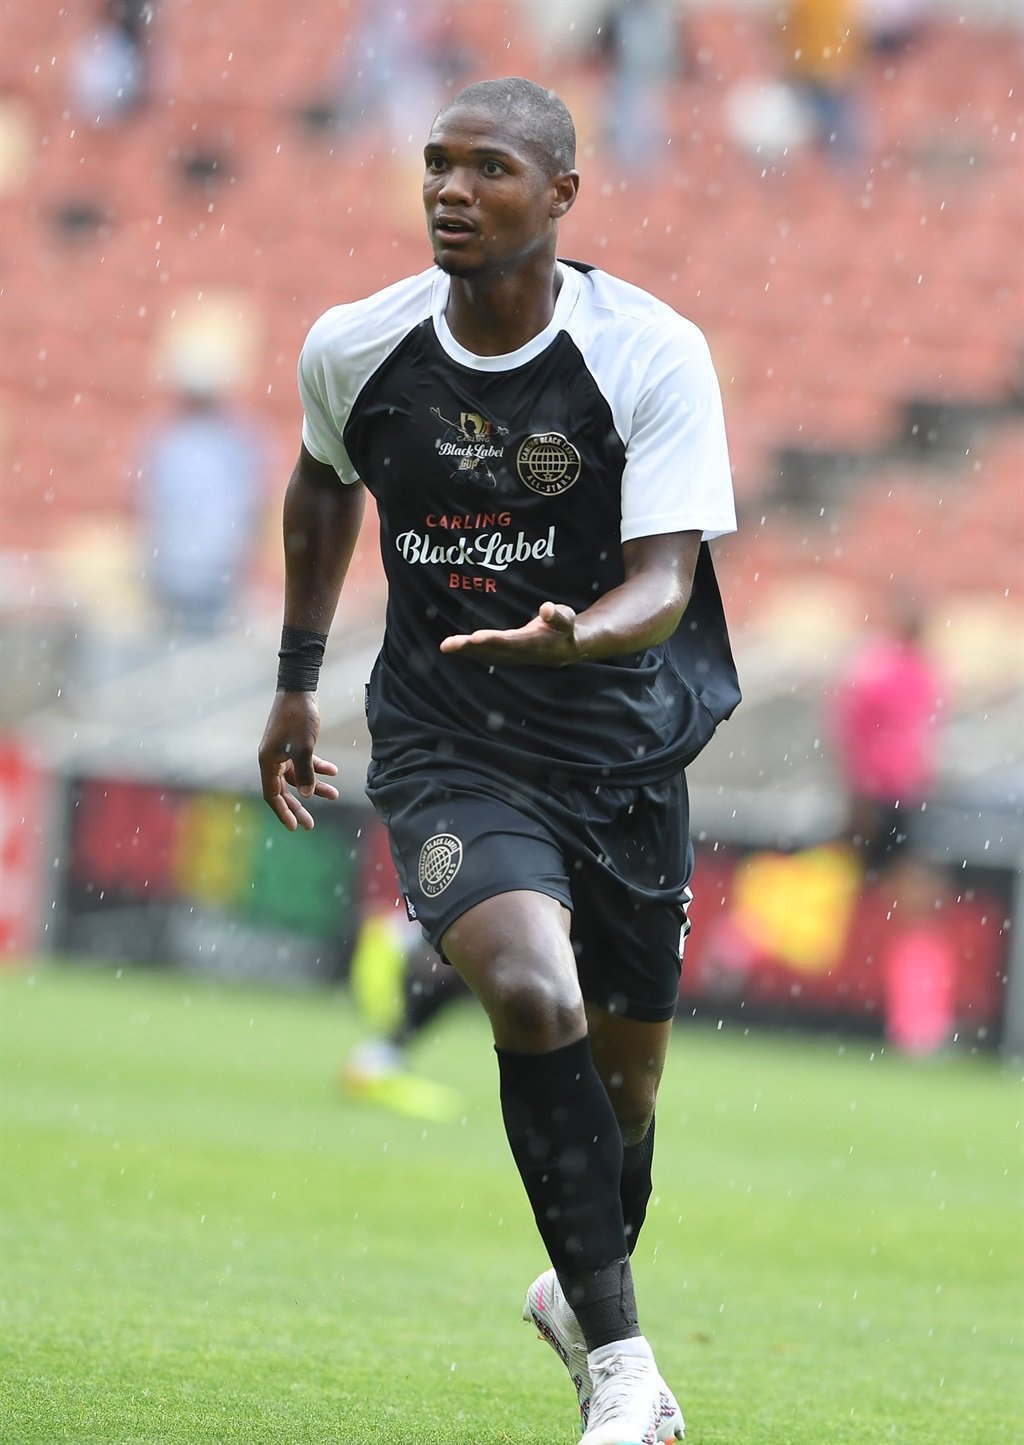 POLOKWANE, SOUTH AFRICA - JANUARY 06: Njabulo Ngcobo Carling All-Star XI during the Carling Knockout match between Stellenbosch FC and Carling Knockout All-Star XI at Peter Mokaba Stadium on January 06, 2024 in Polokwane, South Africa. (Photo by Philip Maeta/Gallo Images)